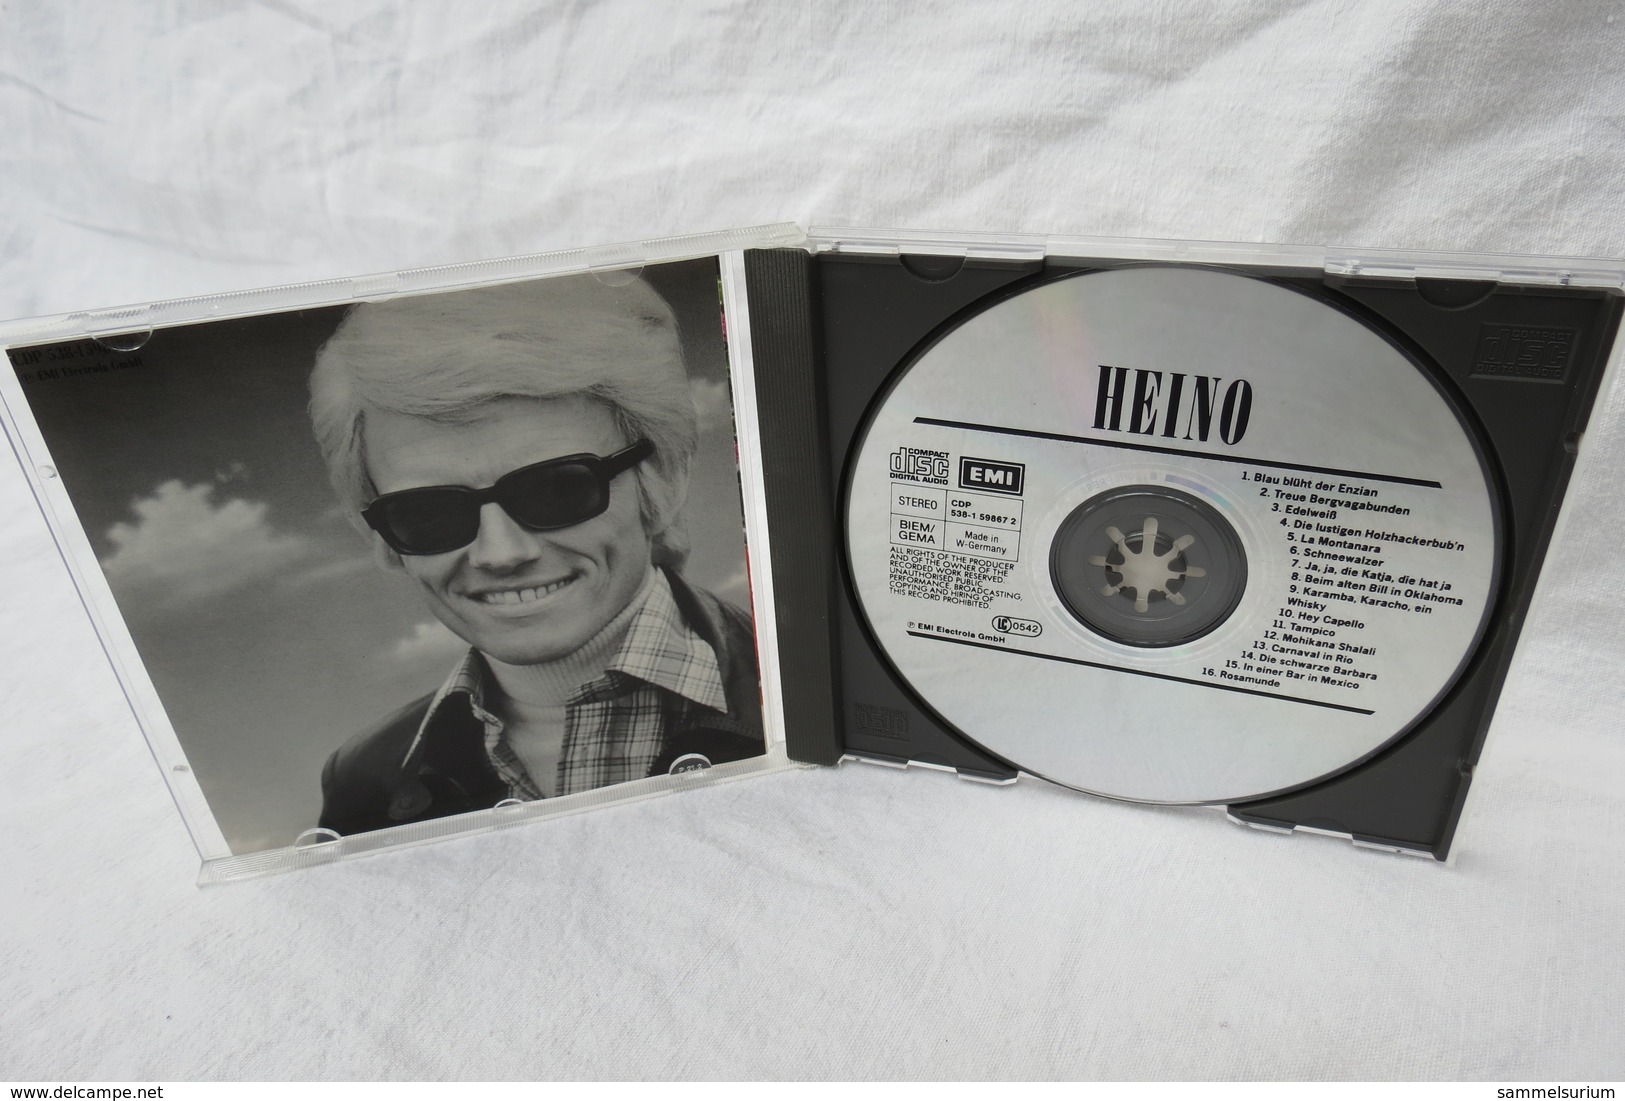 CD "Heino" Gold Collection - Other - German Music